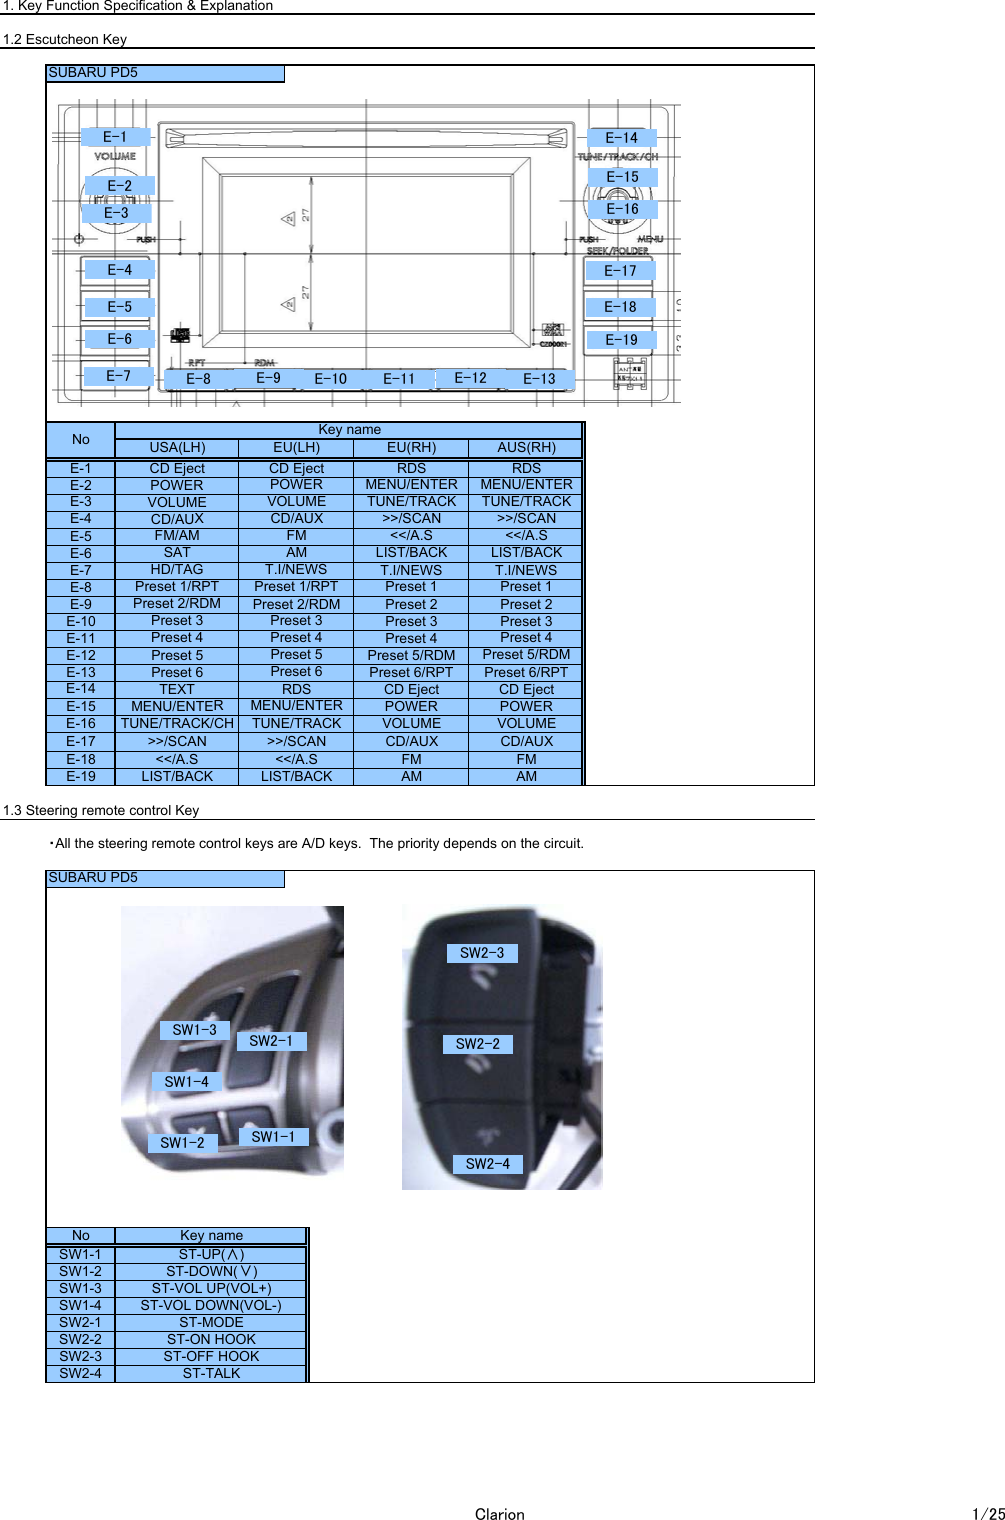 1. Key Function Specification &amp; Explanation1.2 Escutcheon Key1.3 Steering remote control Key・All the steering remote control keys are A/D keys.  The priority depends on the circuit.SW2-2 ST-ON HOOKSW2-1 ST-MODESW1-1SW1-2SW1-3SW1-4 ST-VOL DOWN(VOL-)T.I/NEWSTUNE/TRACK&gt;&gt;/SCANT.I/NEWSCD EjectVOLUMECD/AUXPreset 2/RDMRDSTUNE/TRACKST-VOL UP(VOL+)ST-DOWN(∨)&gt;&gt;/SCAN &gt;&gt;/SCAN&lt;&lt;/A.STEXT CD EjectVOLUMECD/AUXPreset 6/RPTPOWERPreset 4Preset 5/RDMPreset 6/RPTPOWERT.I/NEWSPreset 2Preset 3Preset 2Preset 3CD EjectPOWERVOLUMECD/AUXSATHD/TAGFM/AMMENU/ENTERMENU/ENTERTUNE/TRACK&gt;&gt;/SCANCD/AUXFMAMPreset 4Preset 1/RPTPreset 2/RDMPreset 1/RPTPreset 4Preset 3Preset 3Preset 4Preset 5/RDMST-UP(∧)AMAMSW2-4 ST-TALKSW2-3 ST-OFF HOOKE-8E-9E-10E-11No Key nameE-12E-13E-15SUBARU PD5LIST/BACKE-18 &lt;&lt;/A.SPreset 5E-19 LIST/BACKE-1E-3E-4E-17E-14E-16E-5E-6E-7E-2TUNE/TRACK/CHPreset 5Preset 6MENU/ENTERMENU/ENTERVOLUMEPreset 1 Preset 1&lt;&lt;/A.SLIST/BACKLIST/BACK&lt;&lt;/A.SFMFMPreset 6CD EjectPOWERRDSRDSSUBARU PD5Key nameNo USA(LH) EU(LH) EU(RH) AUS(RH)E-1E-2E-4E-3E-5E-14E-6E-7E-17E-15E-16E-18E-19E-8 E-9 E-10 E-13E-12E-11SW1-1SW2-2SW2-3SW2-1SW1-4SW1-3SW1-2SW2-4Clarion 1/25